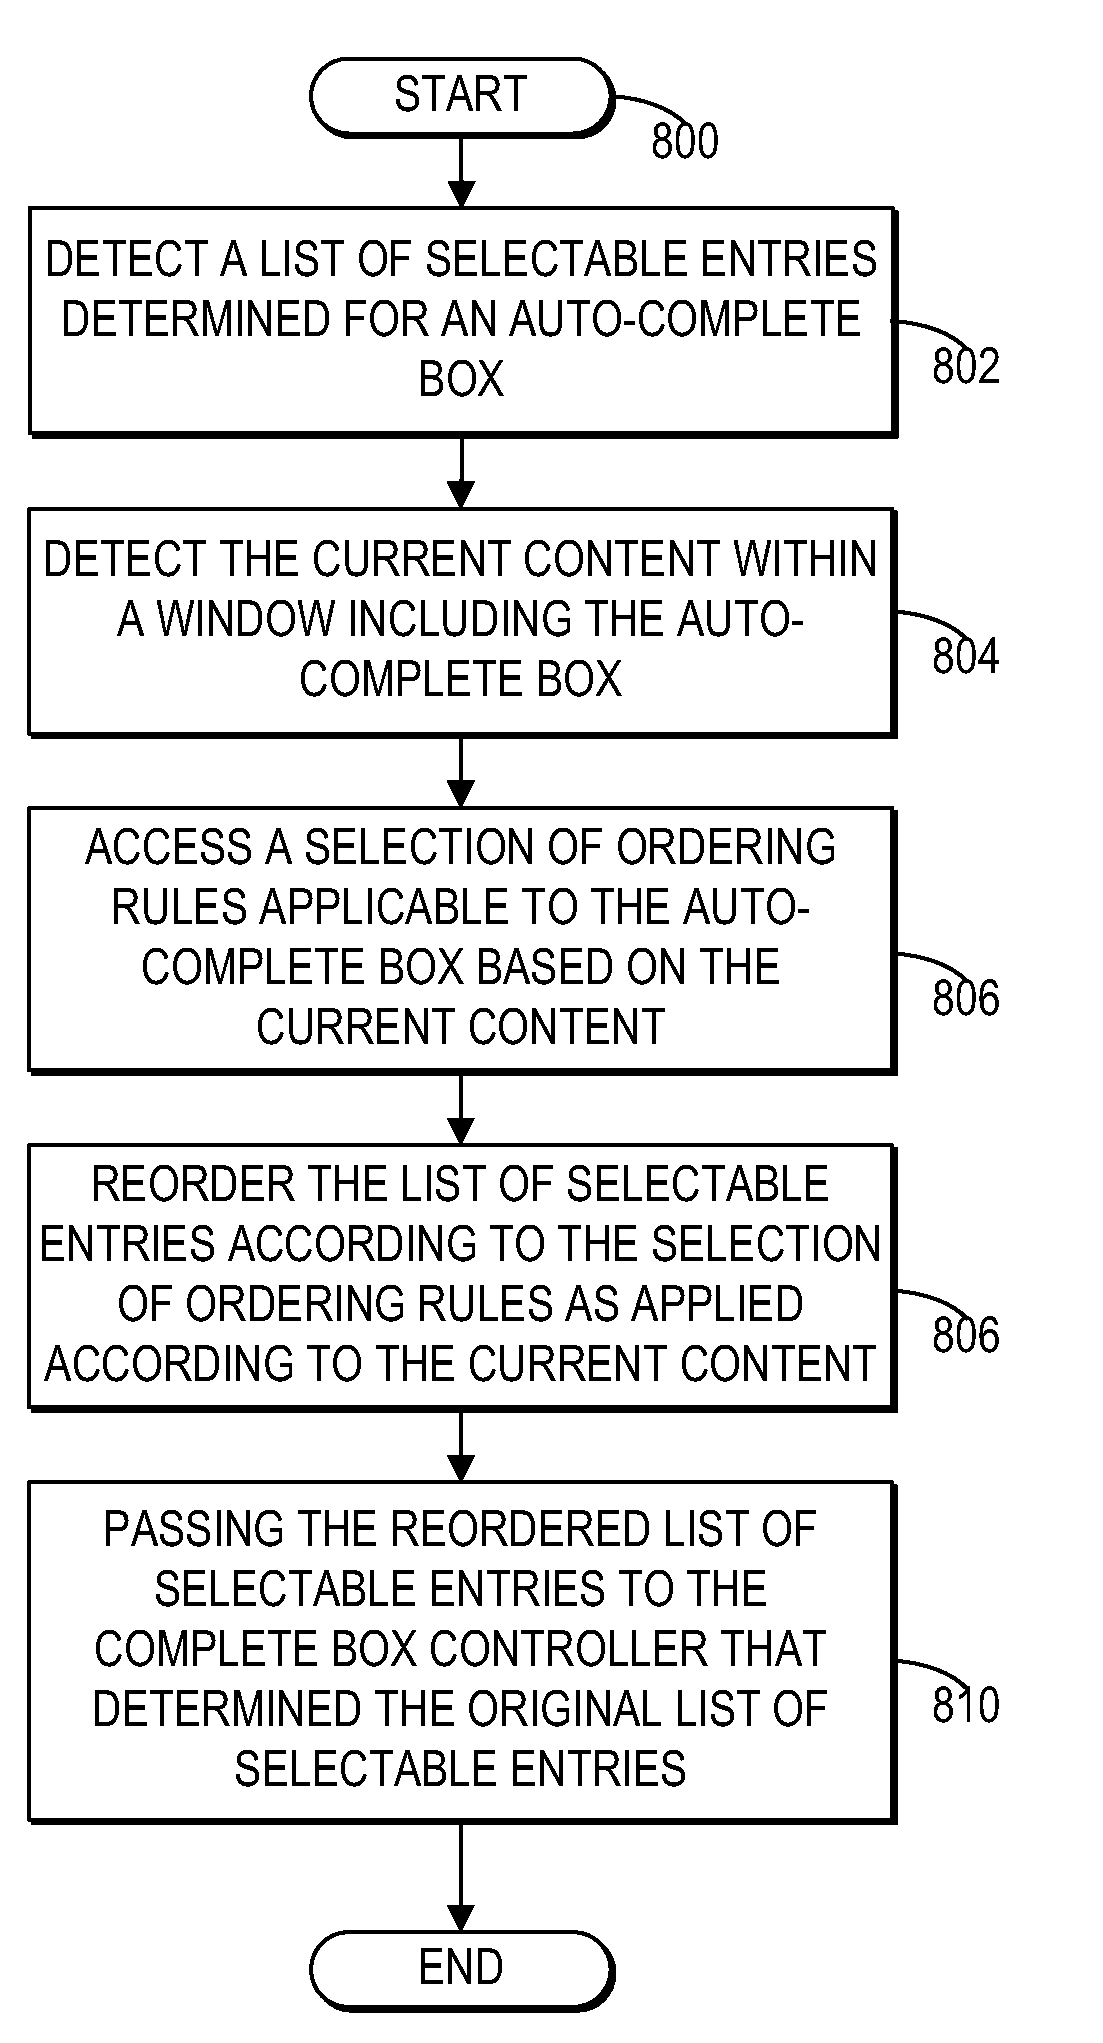 Content-based ordering of a list of selectable entries for an auto-complete box